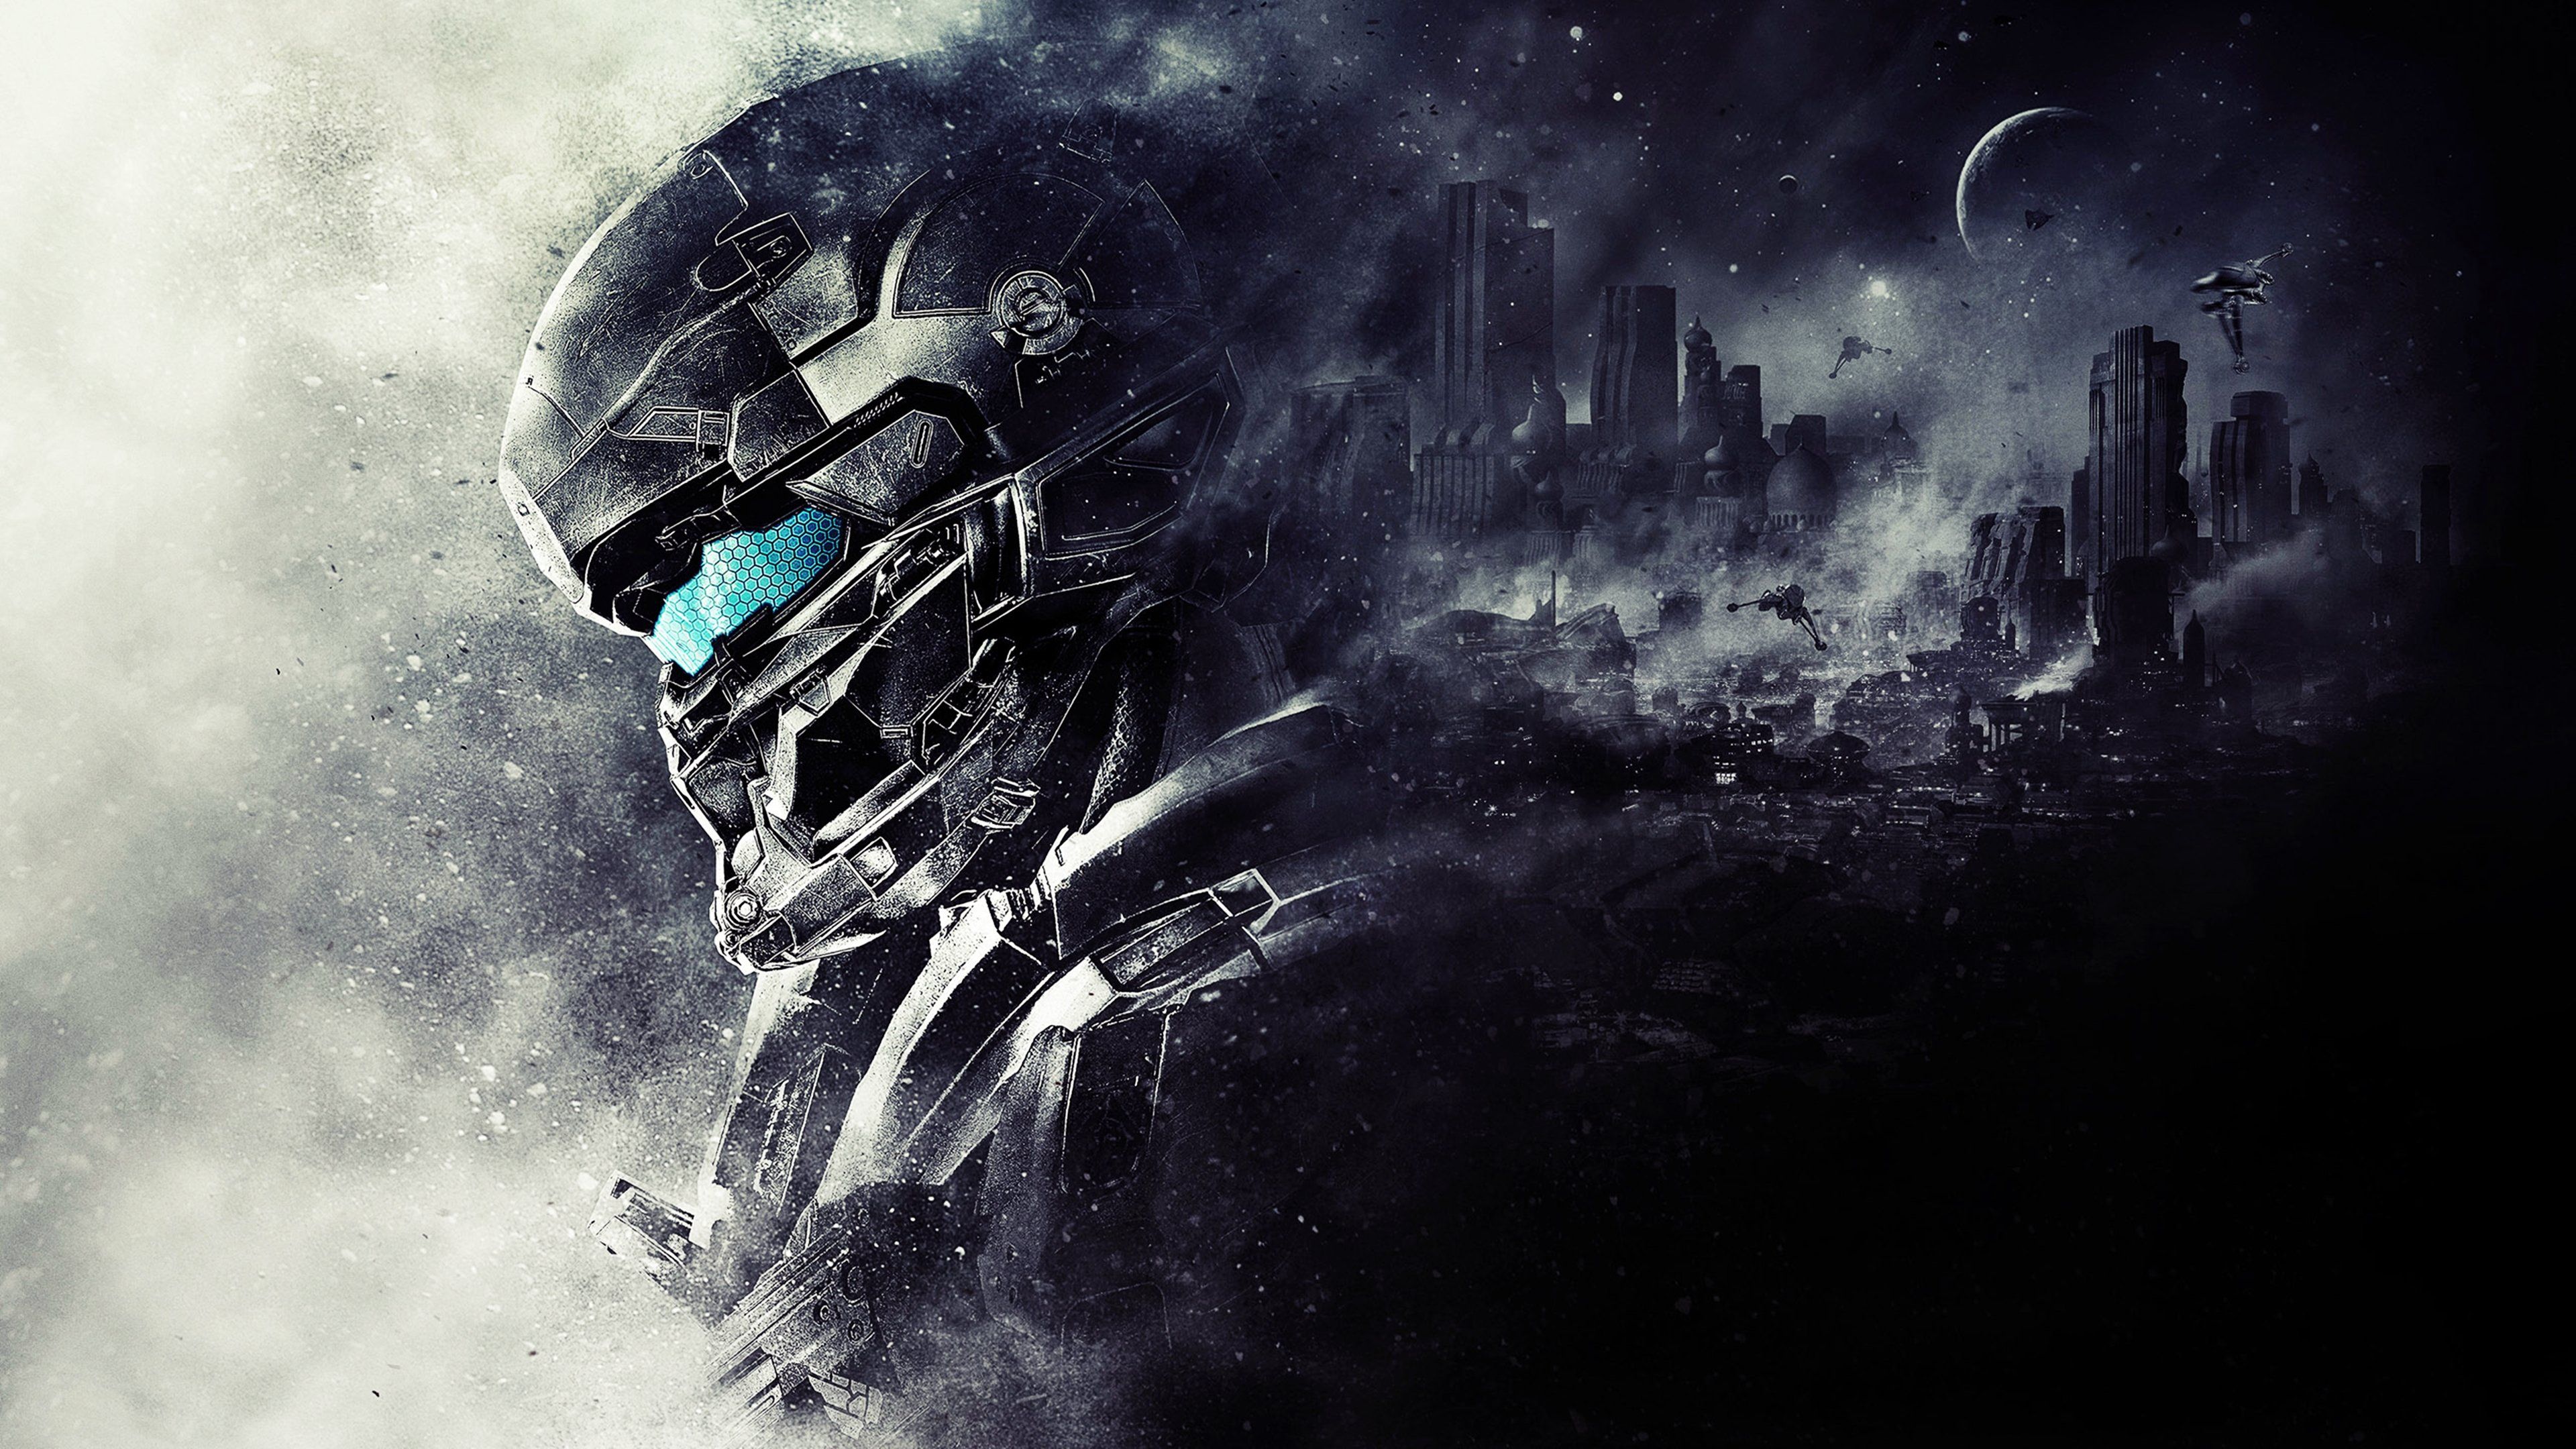 HALO 5 GUARDIANS Shooter Fps Action Fighting Warrior Sci Fi Futuristic 1haloguardians Wallpaperx2160